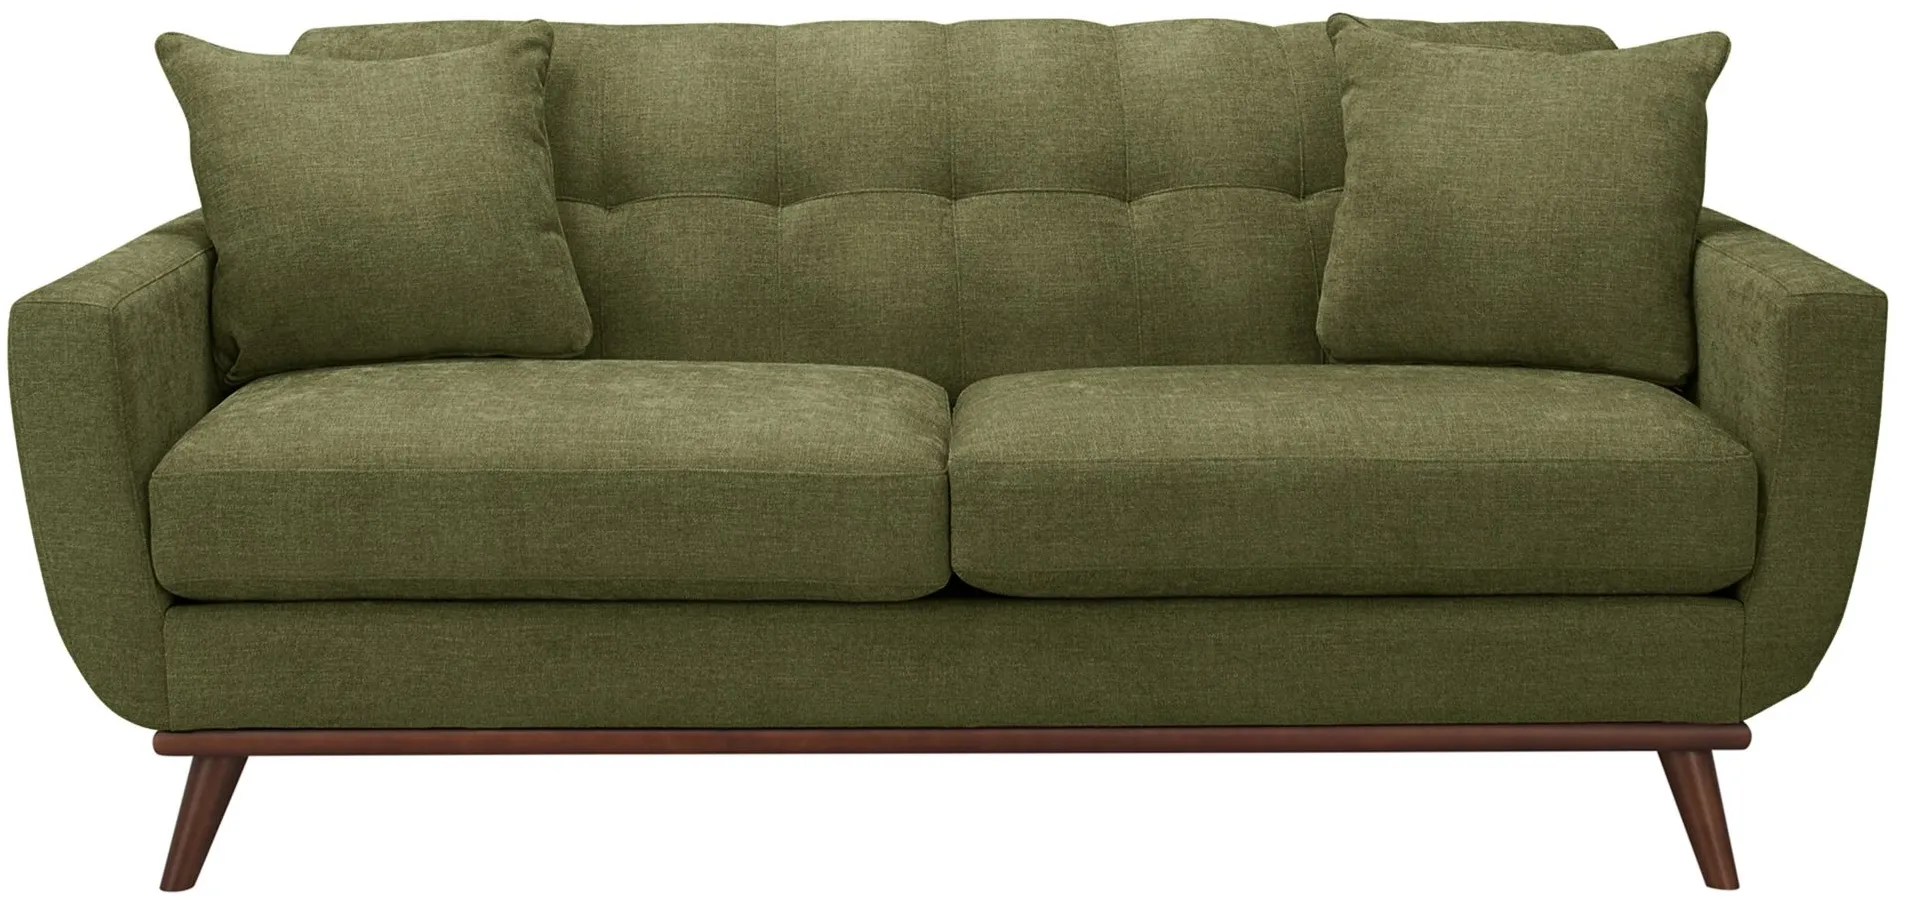 Milo Apartment Sofa in Suede-So-Soft Pine by H.M. Richards